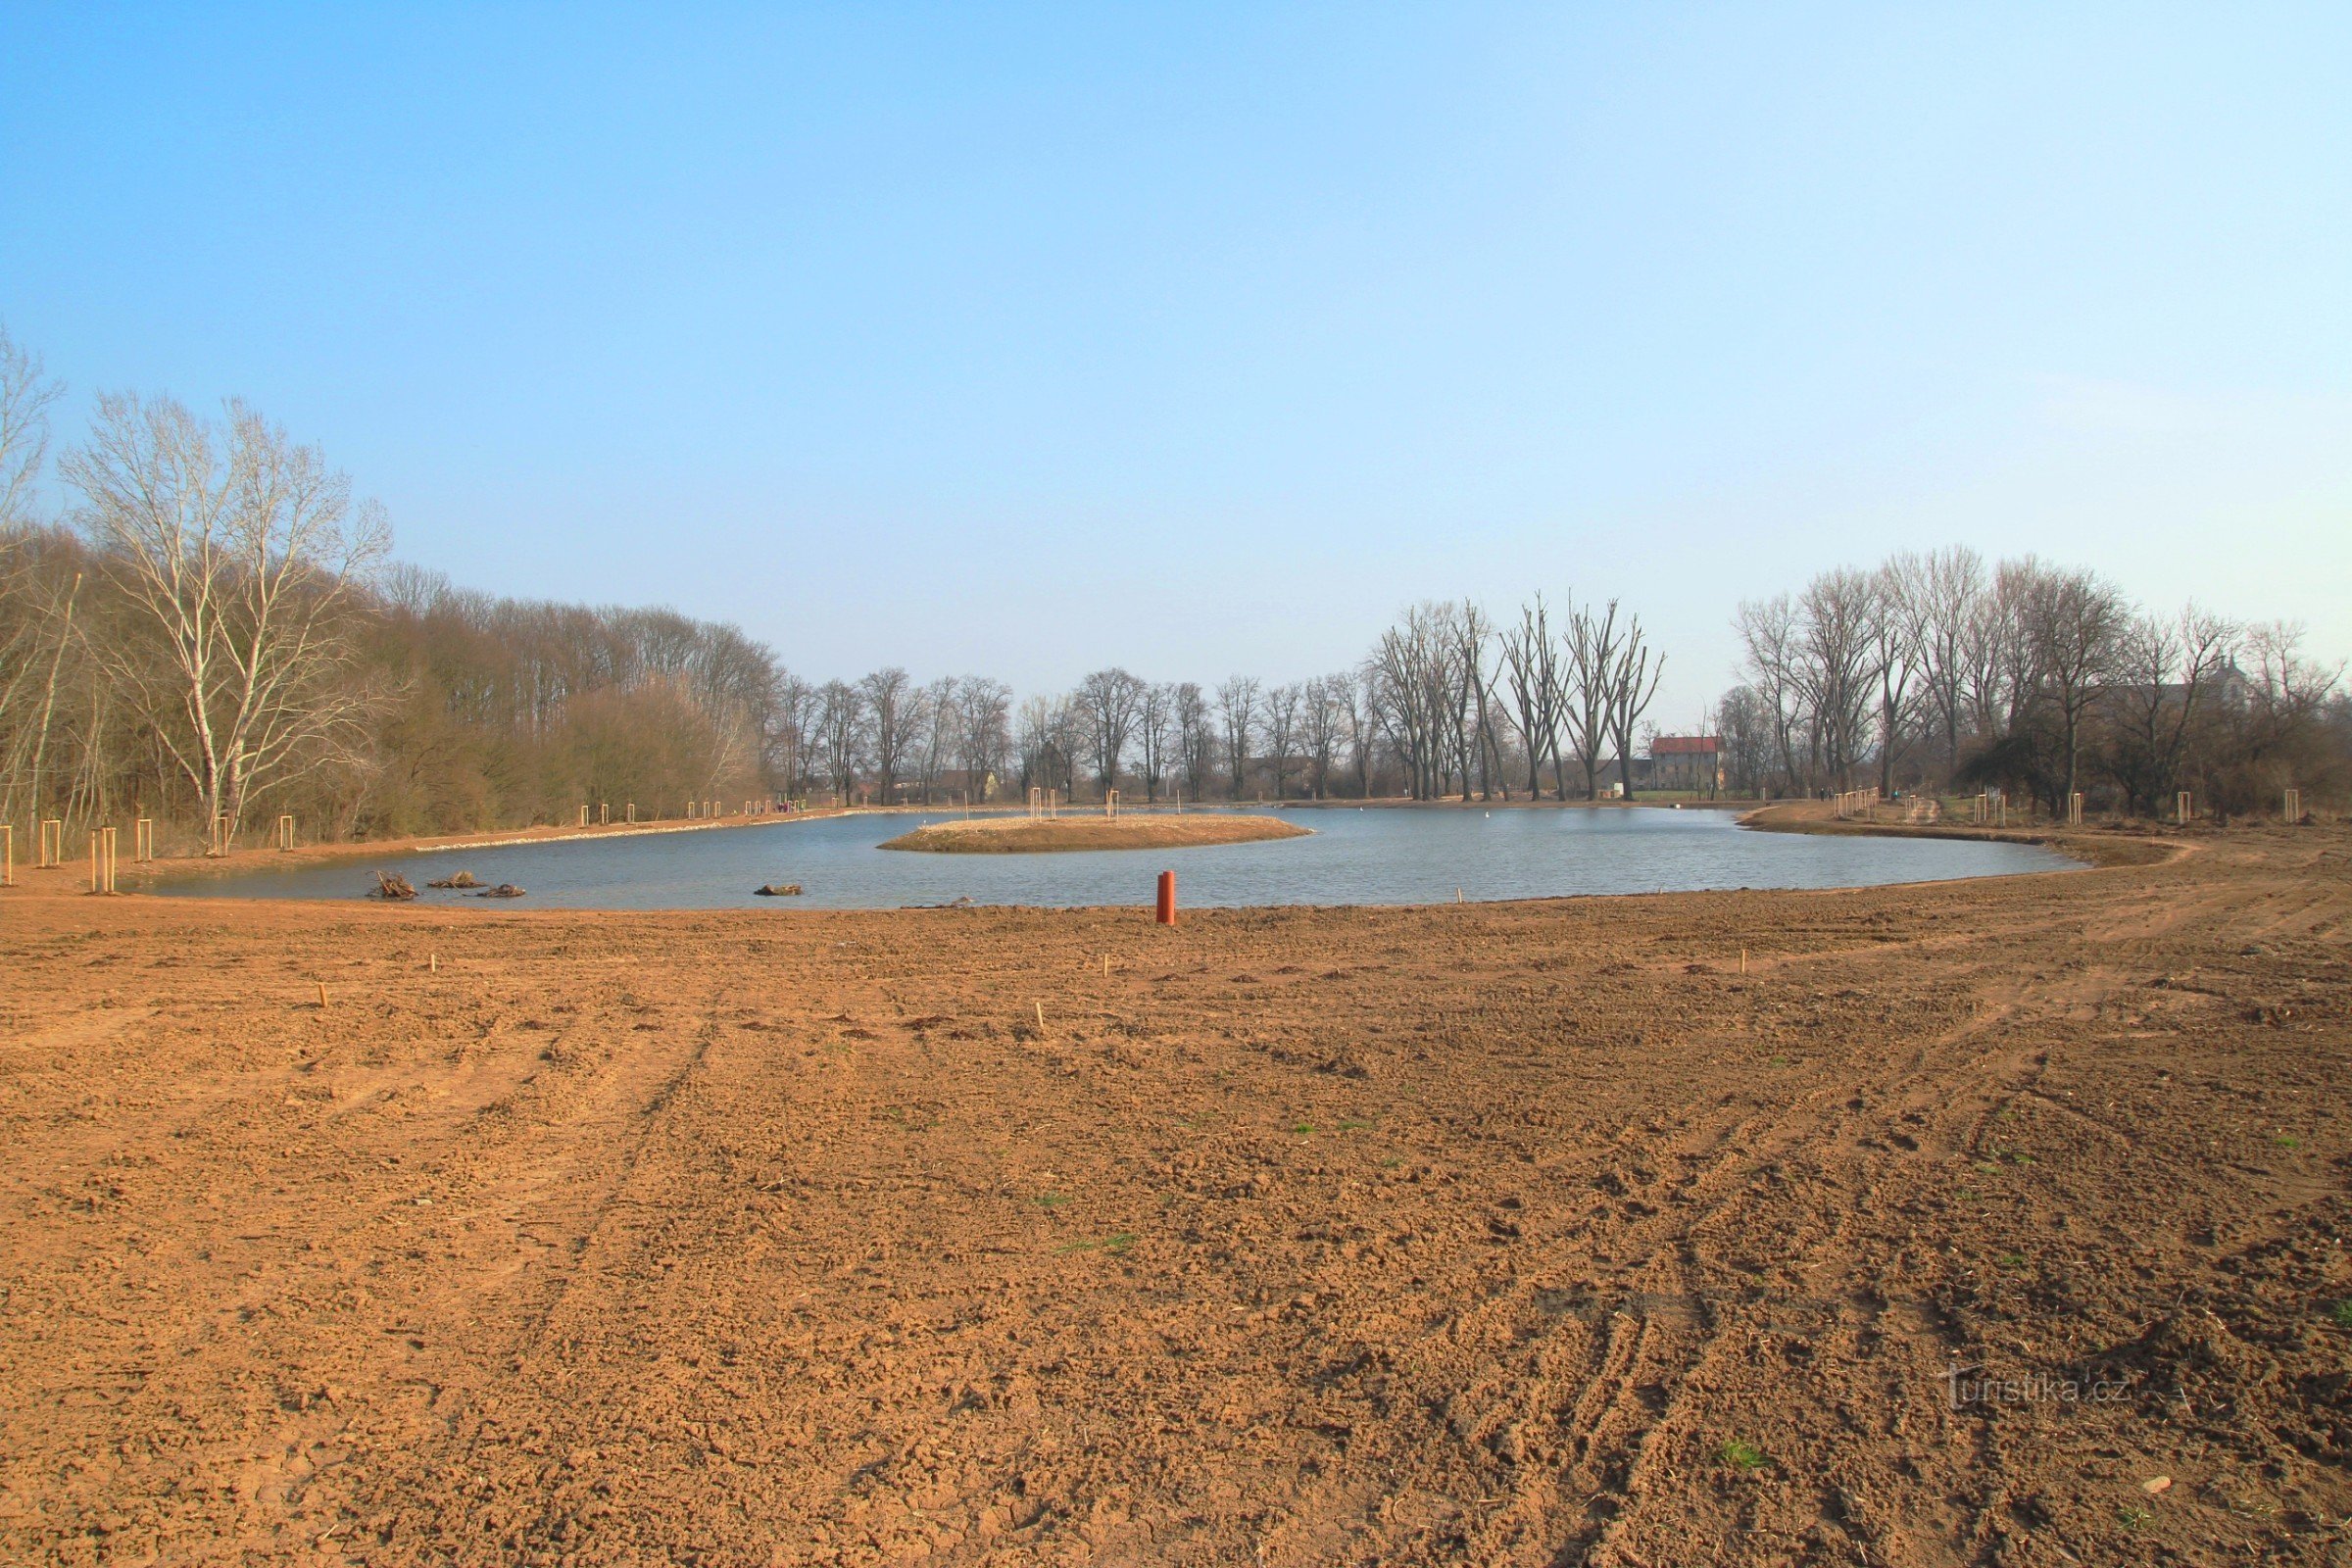 General view of the pond from the back, which will be landscaped as a park